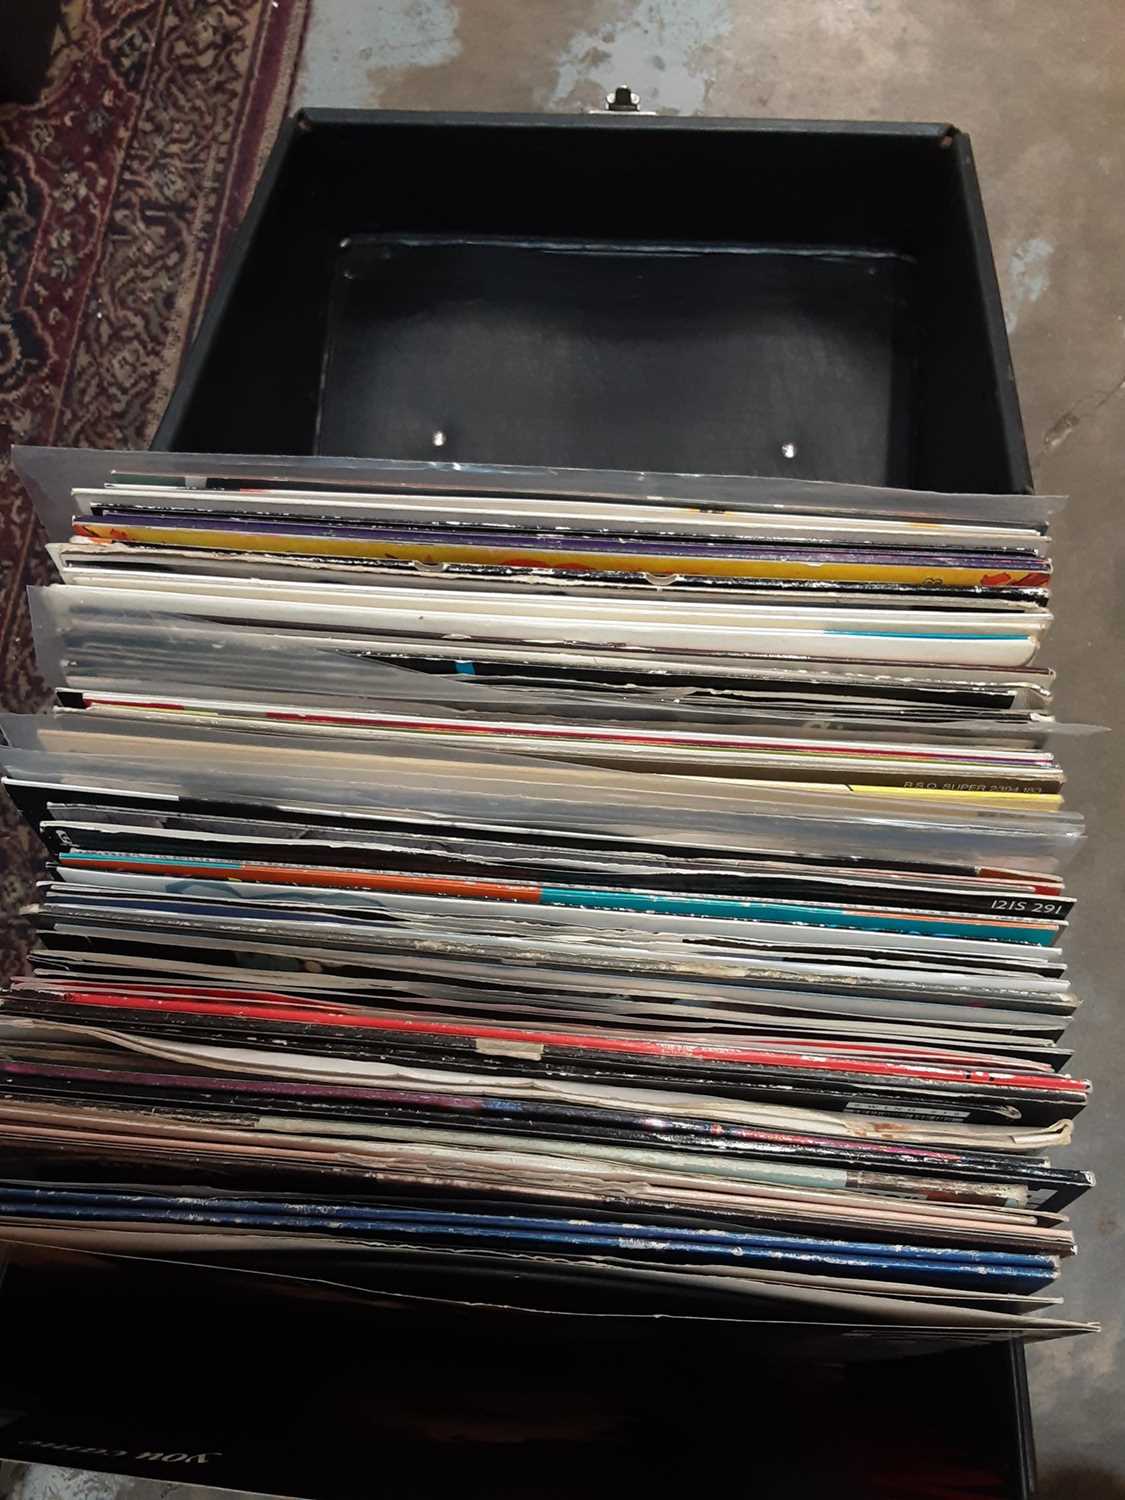 Two DJ cases of 12" singles including Soul II Soul, Techtronic, Beatmasters, Stranglers, New Order, - Image 2 of 4